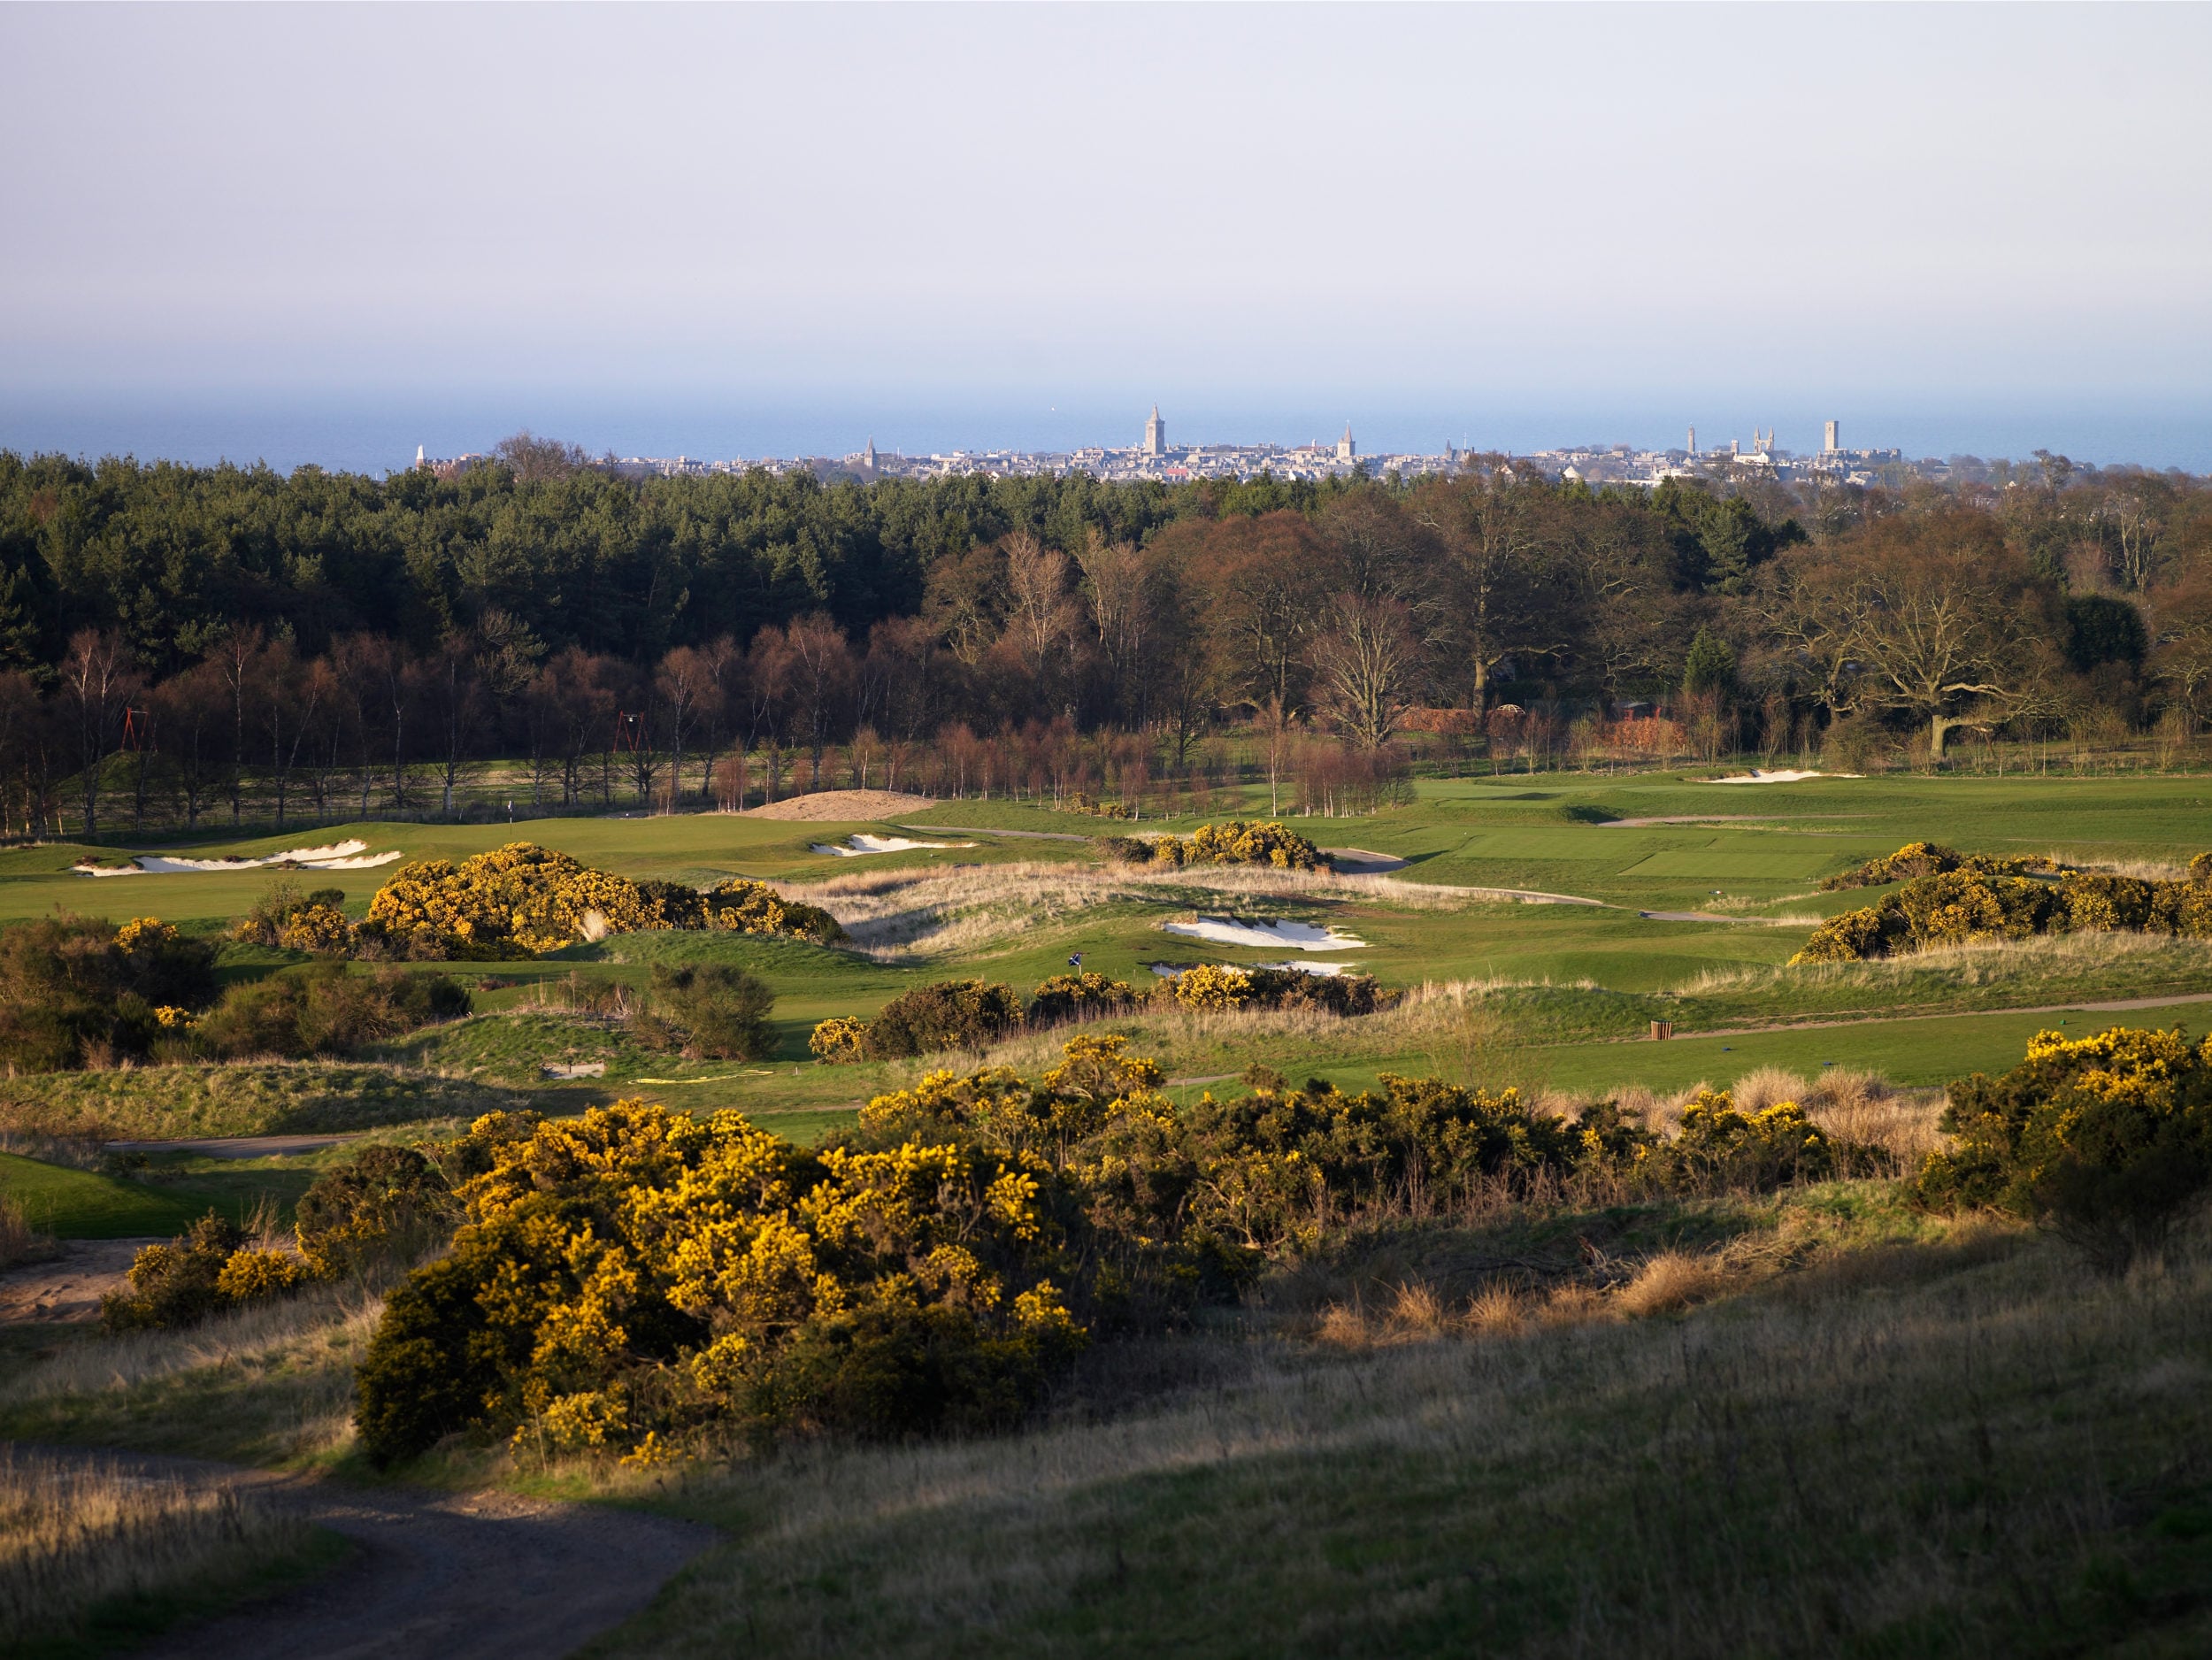 Heather and gorse frame most of the golf course and offer views of the St Andrews town